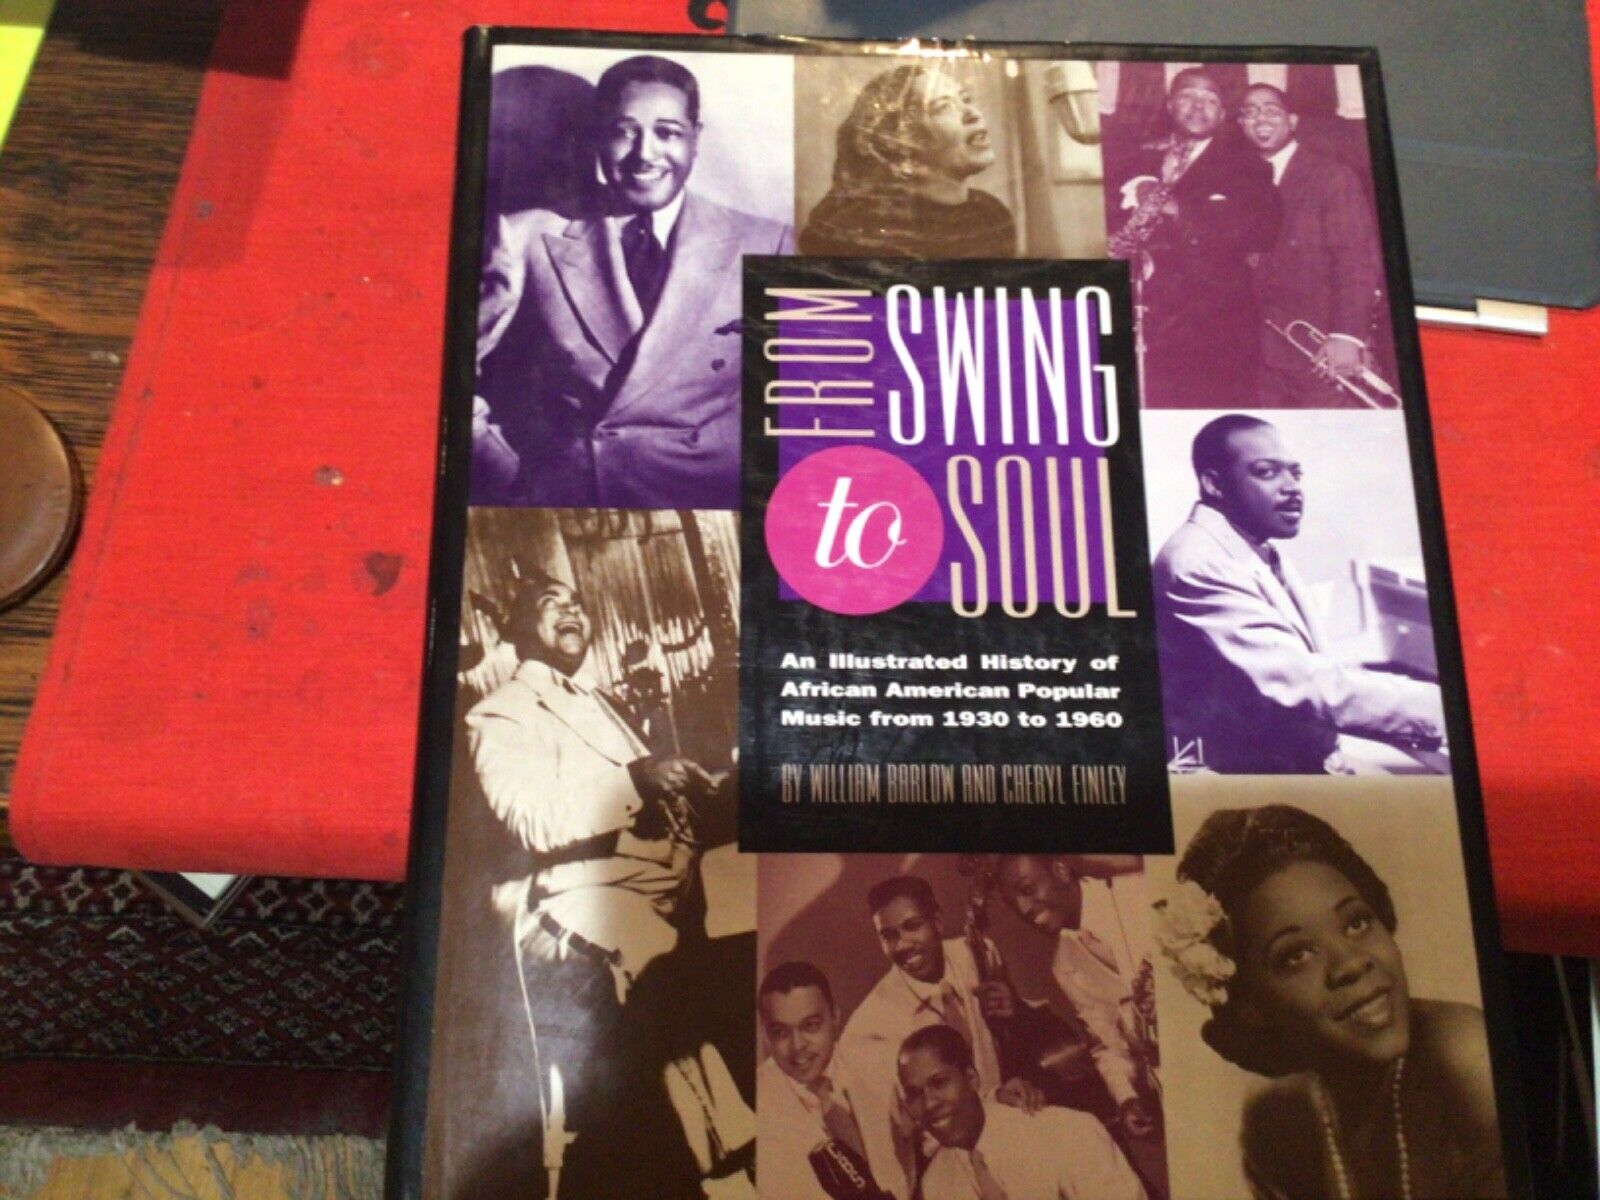 From Swing to Soul: African American Popular Music 1930-1960, Inscribed